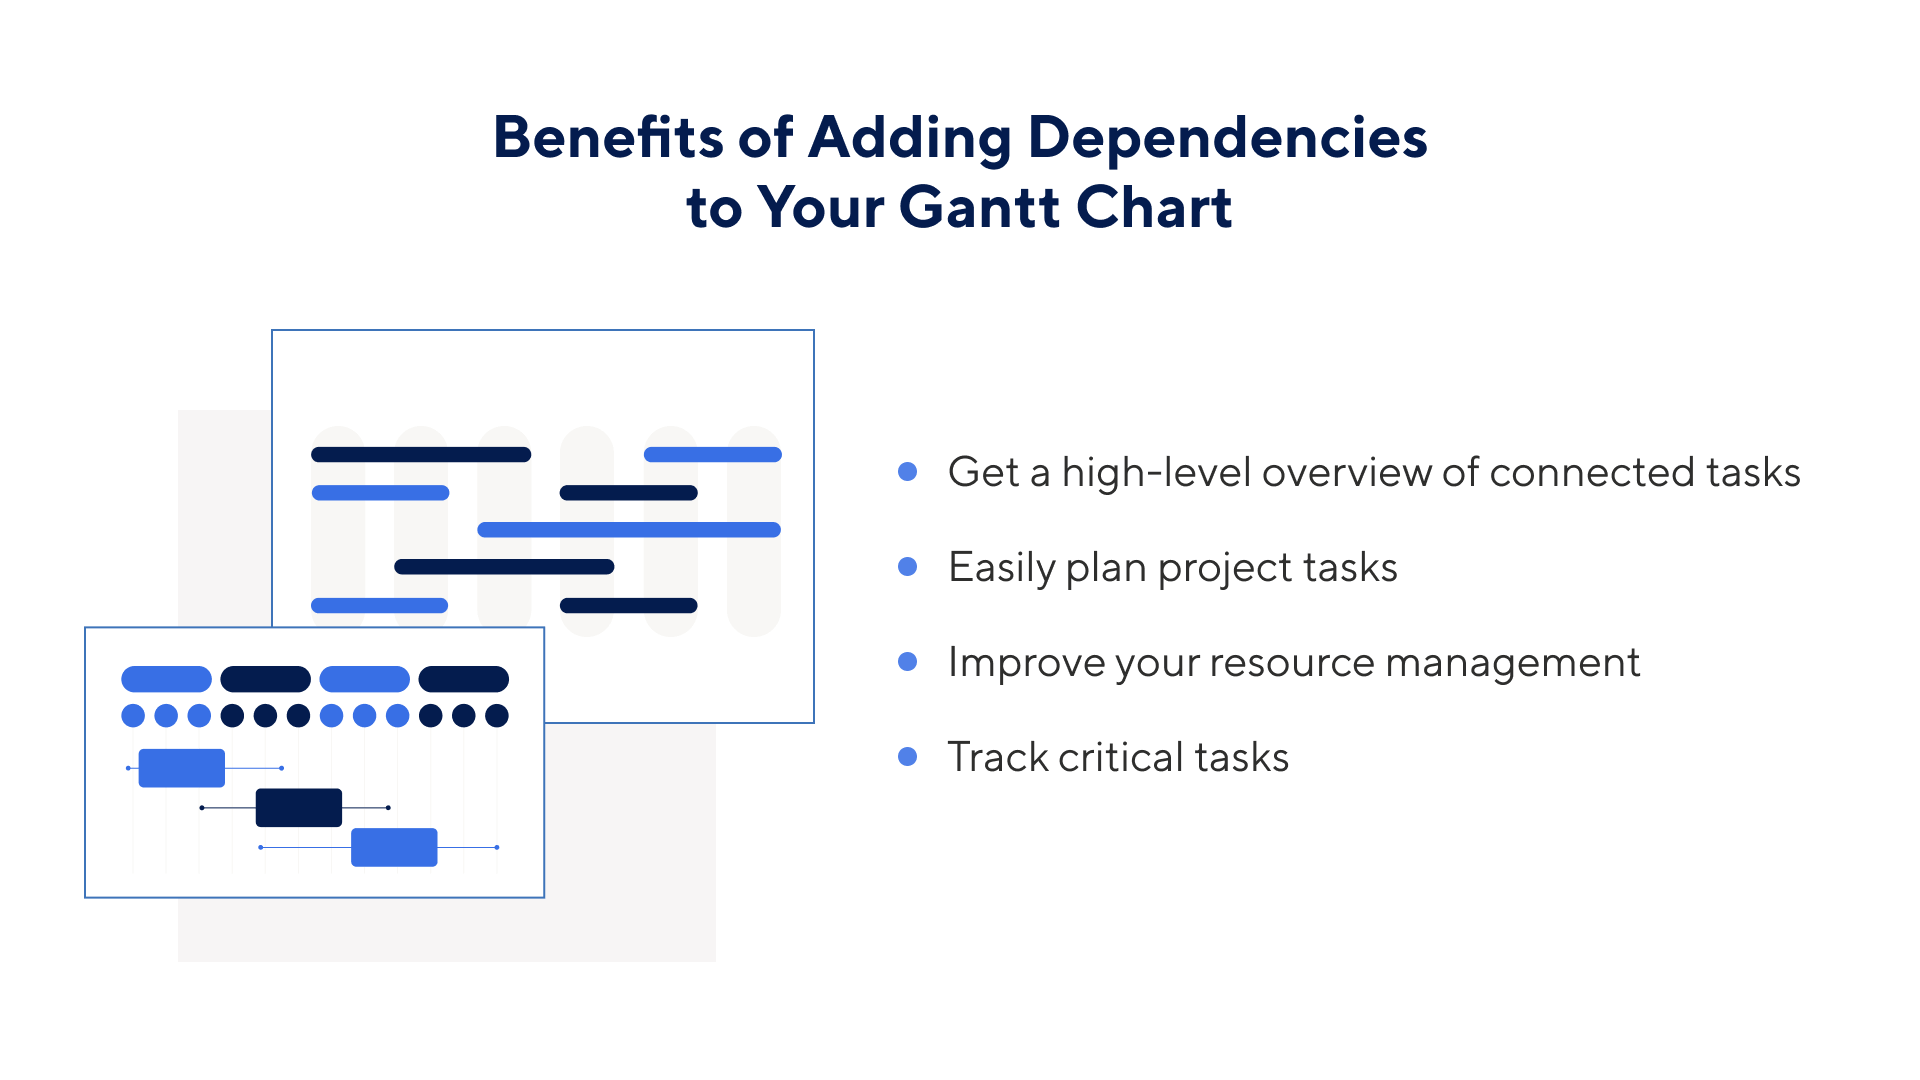 Infographic showing the benefits of using a Gantt chart with dependencies.